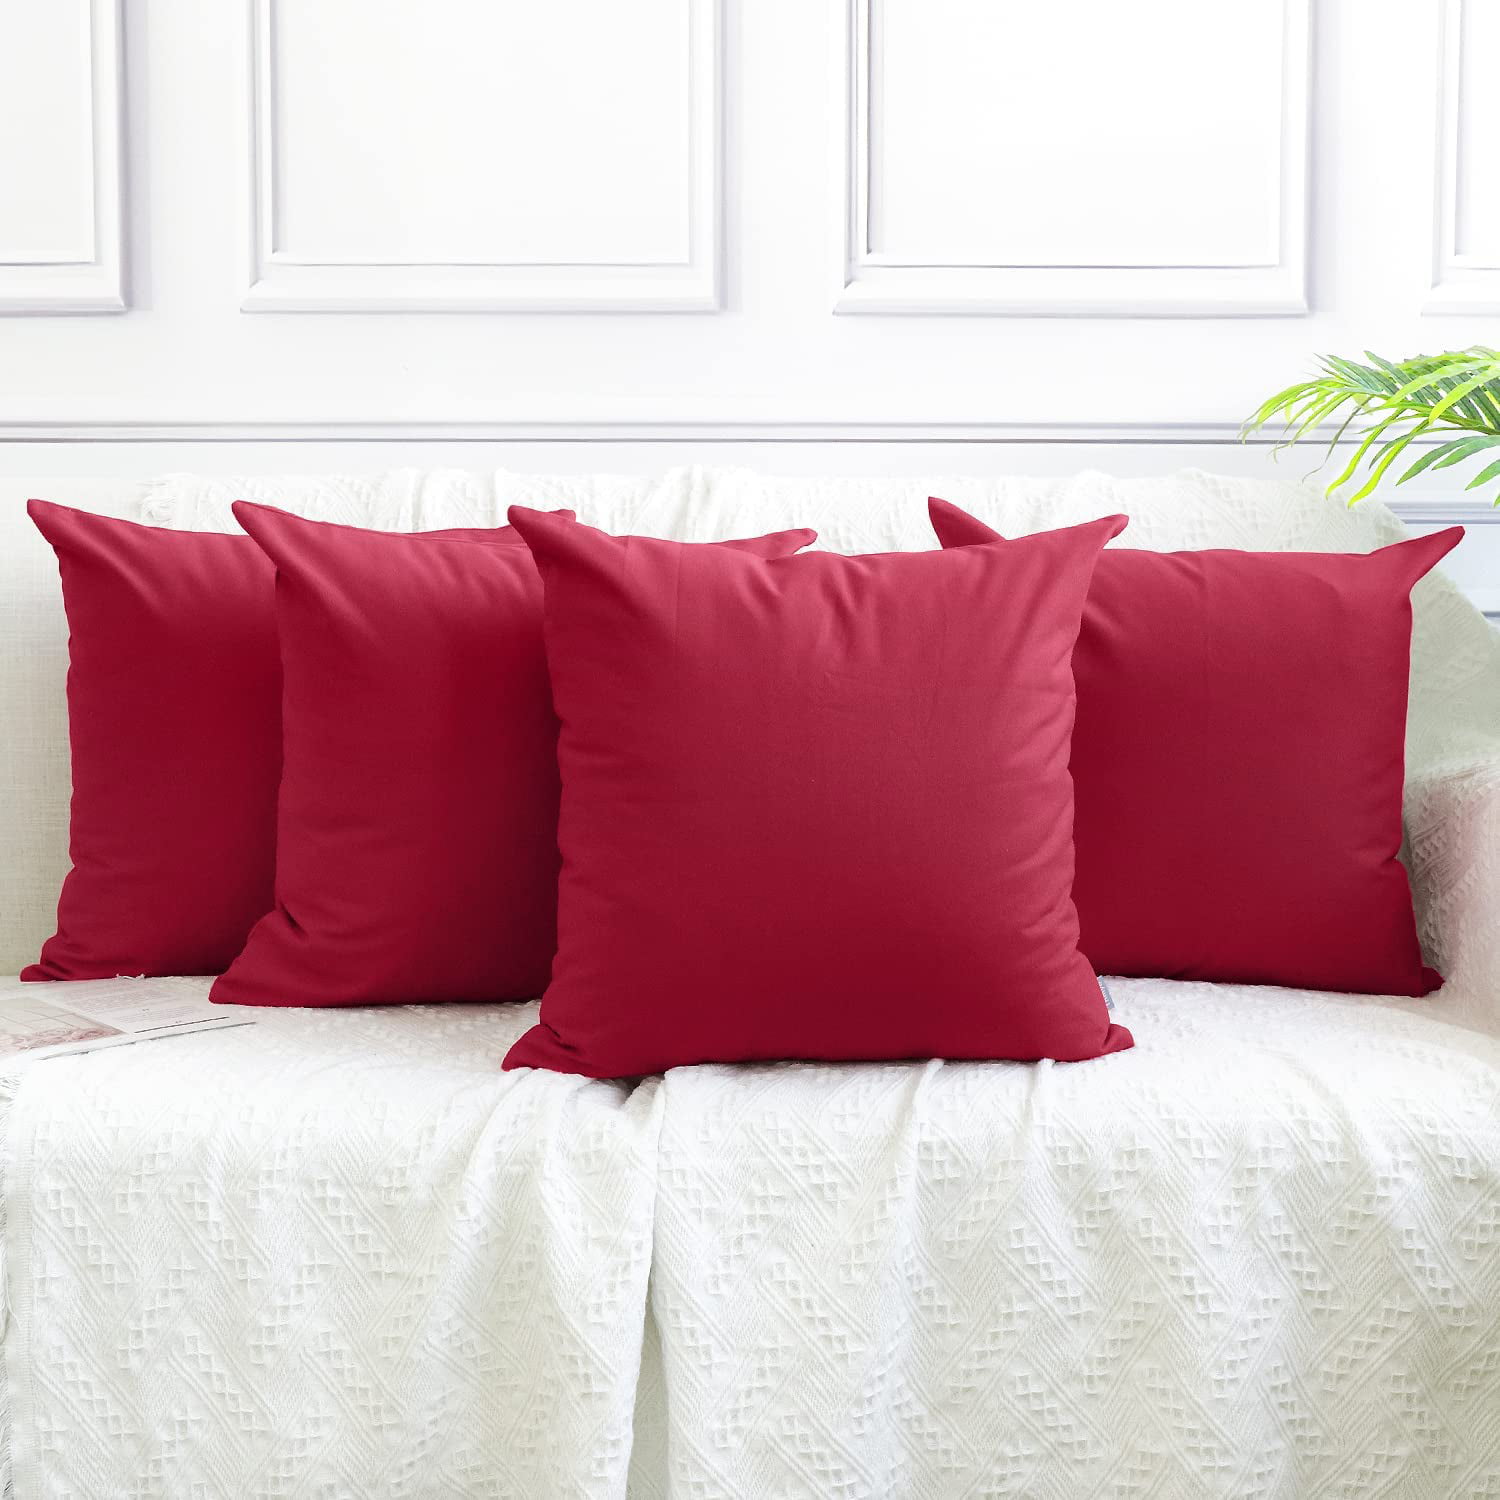 4-Pack Cotton Comfortable Solid Decorative Throw Pillow Case Square Cushion Cover Pillowcase Cover Only,No Insert 20x20inch/50x50cm, Red